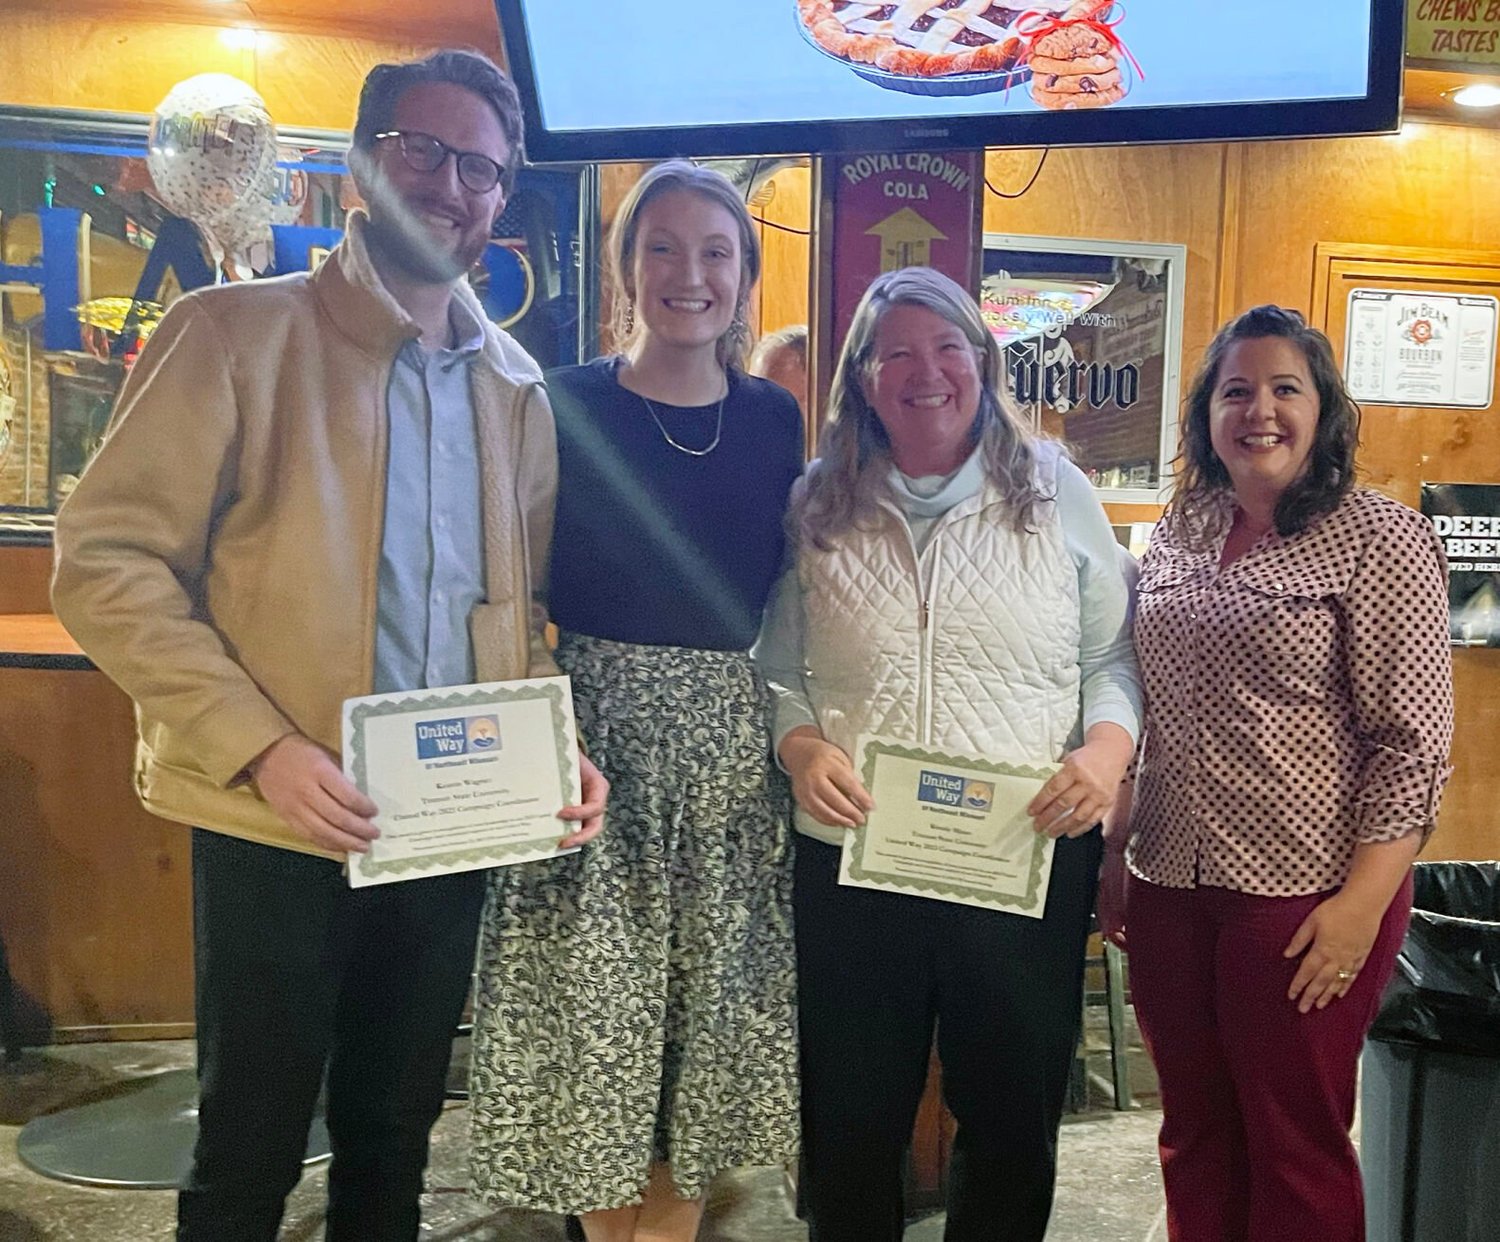 From left: Former marketing head at Truman State University and a campaign chair Keaton Wagner, Ramey Weichelt, United Way of Northeast Missouri drive chair, Co-Chairman Truman Communications Professor Wendy Miner and 2023 assistant drive chair Amanda Selby.